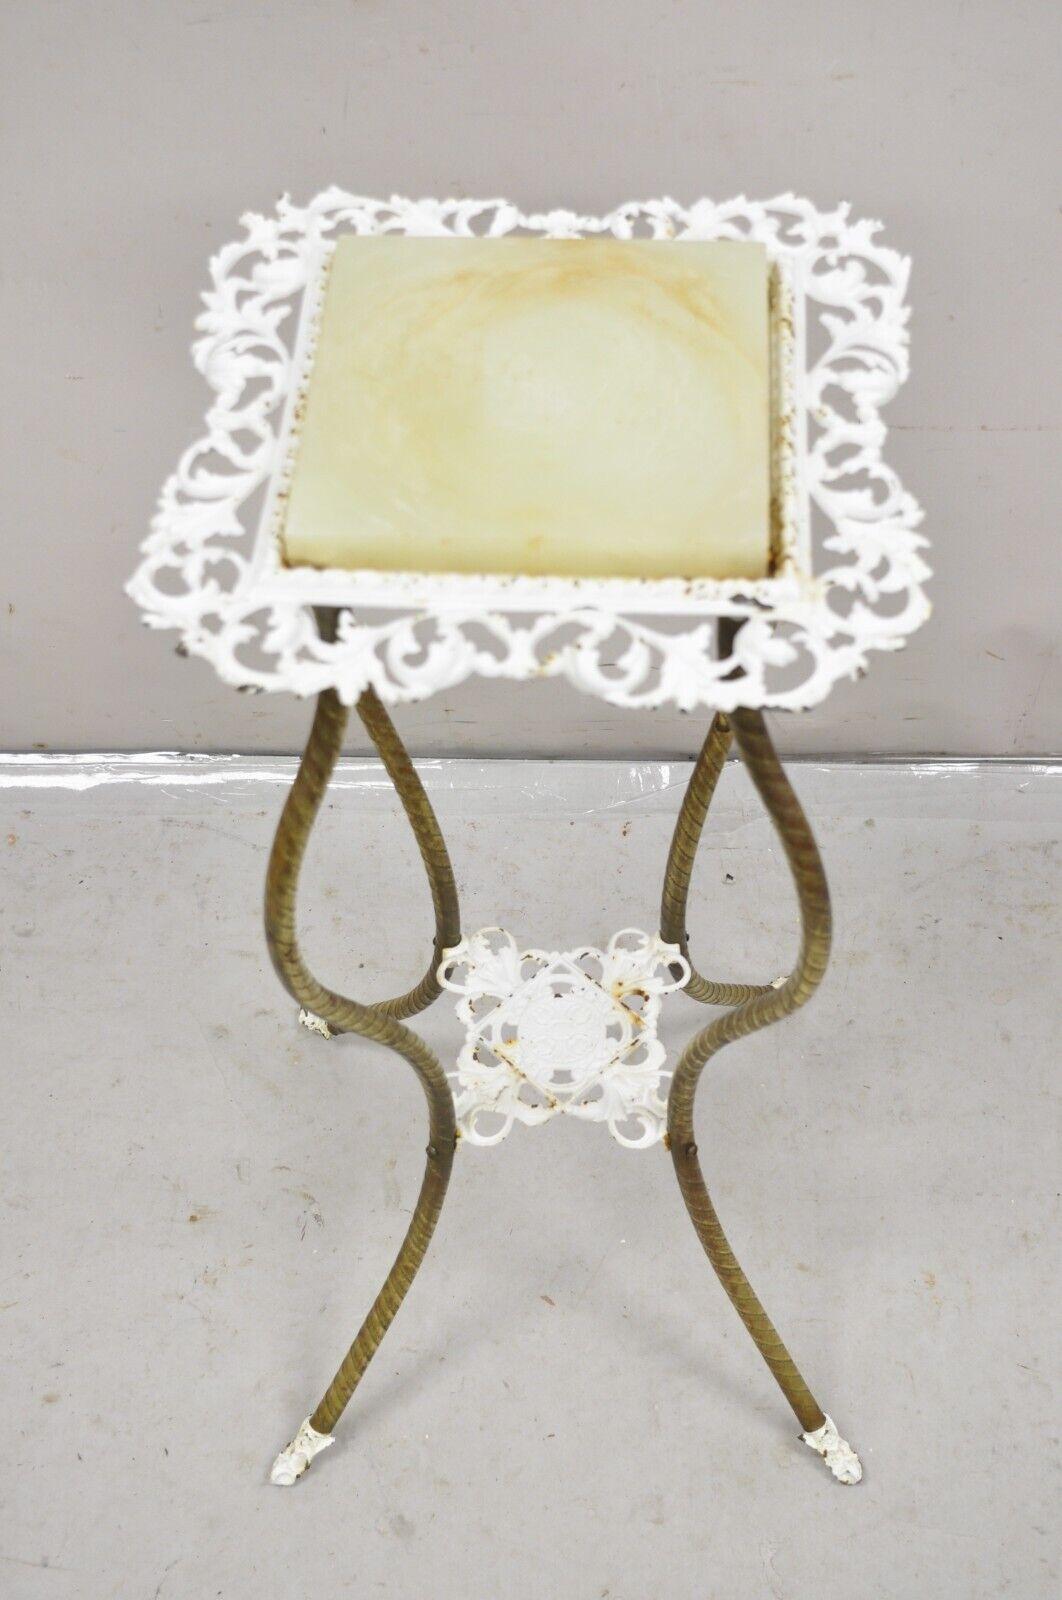 Antique Victorian Brass 2 Tier Onyx Stone Top Plant Stand Pedestal Side Table with White Painted Accents. Circa 1900. Measurements: 30.5